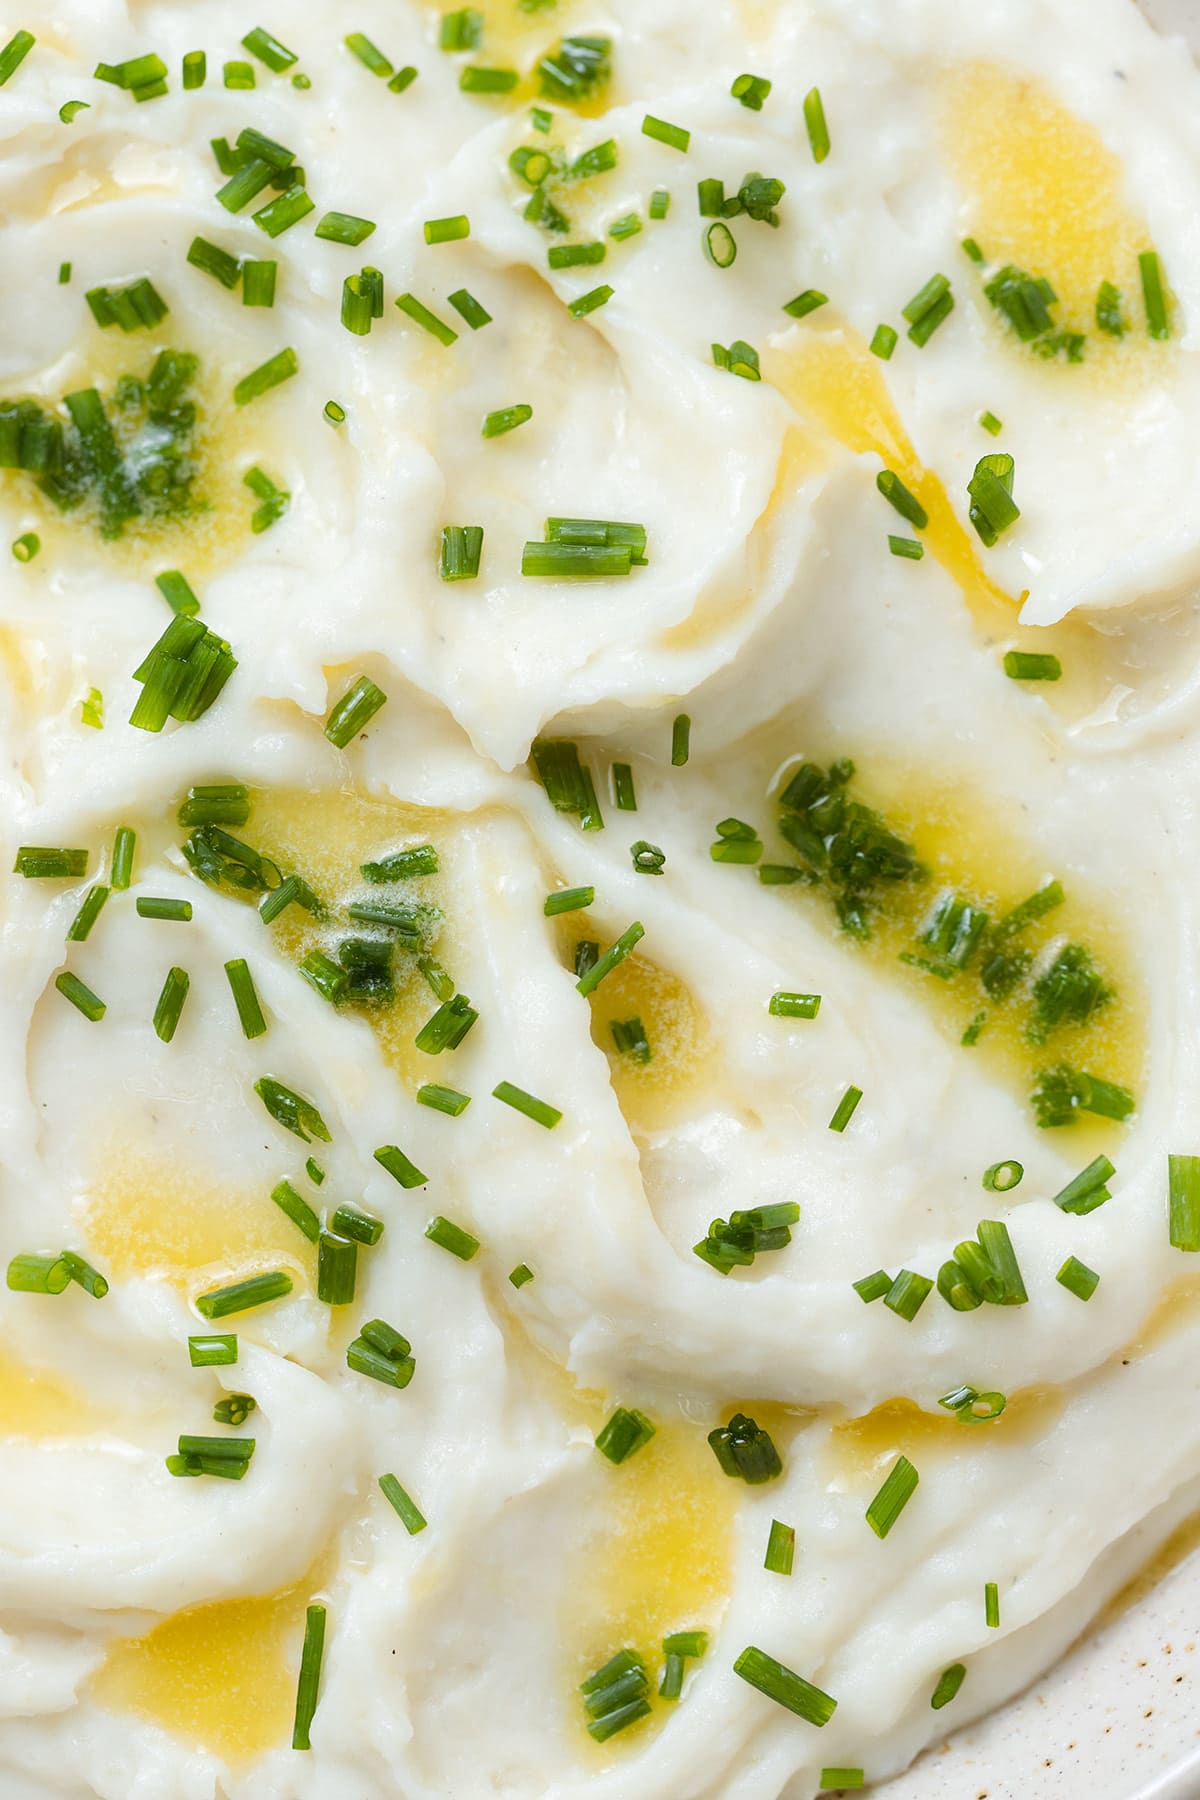 Whipped mashed potatoes topped with melted butter and chopped fresh chives in a beige bowl.